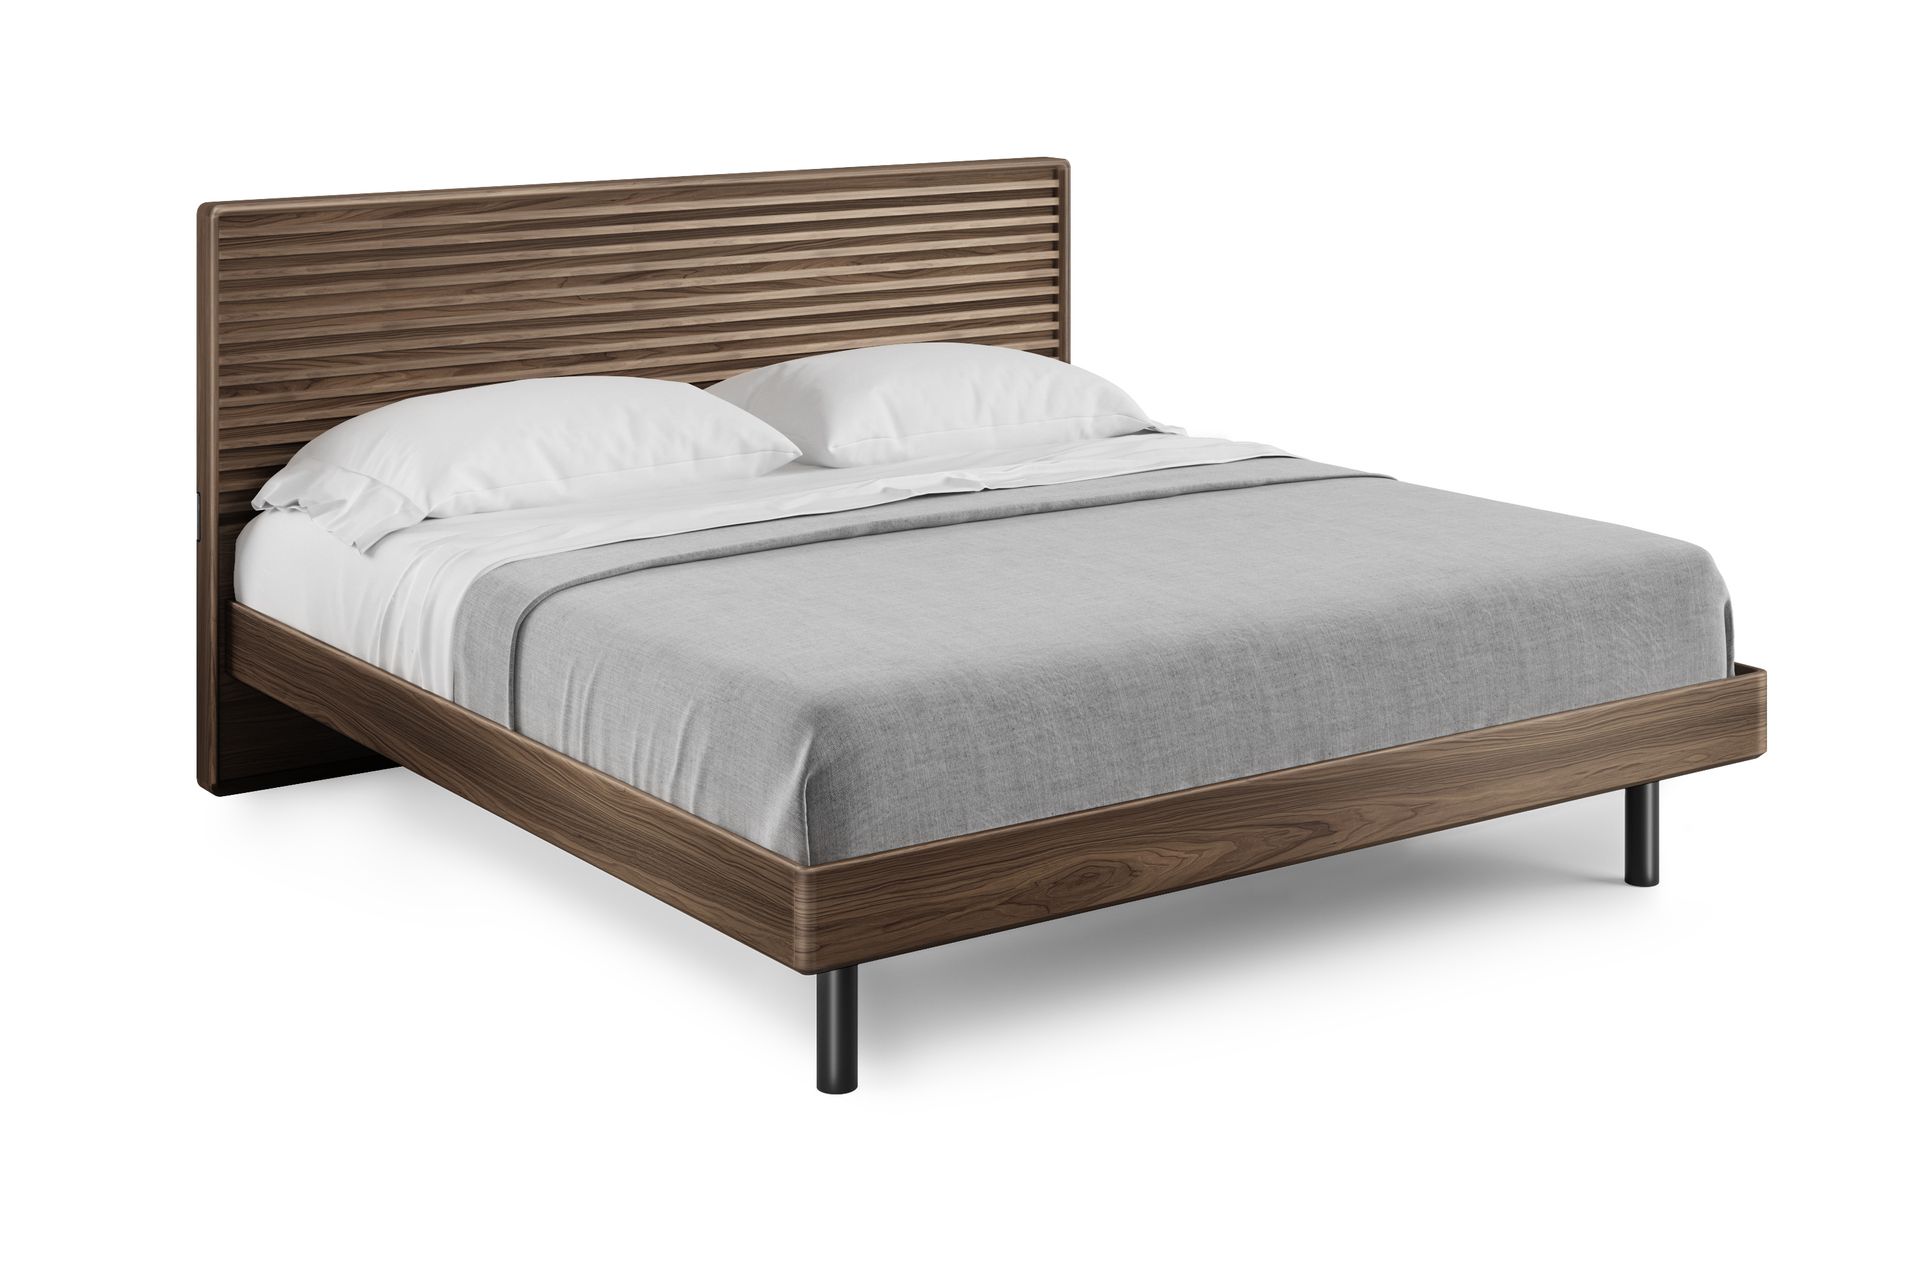 Cross-LINQ 9129 Modern King Bed With Charging Stations | BDI Furniture